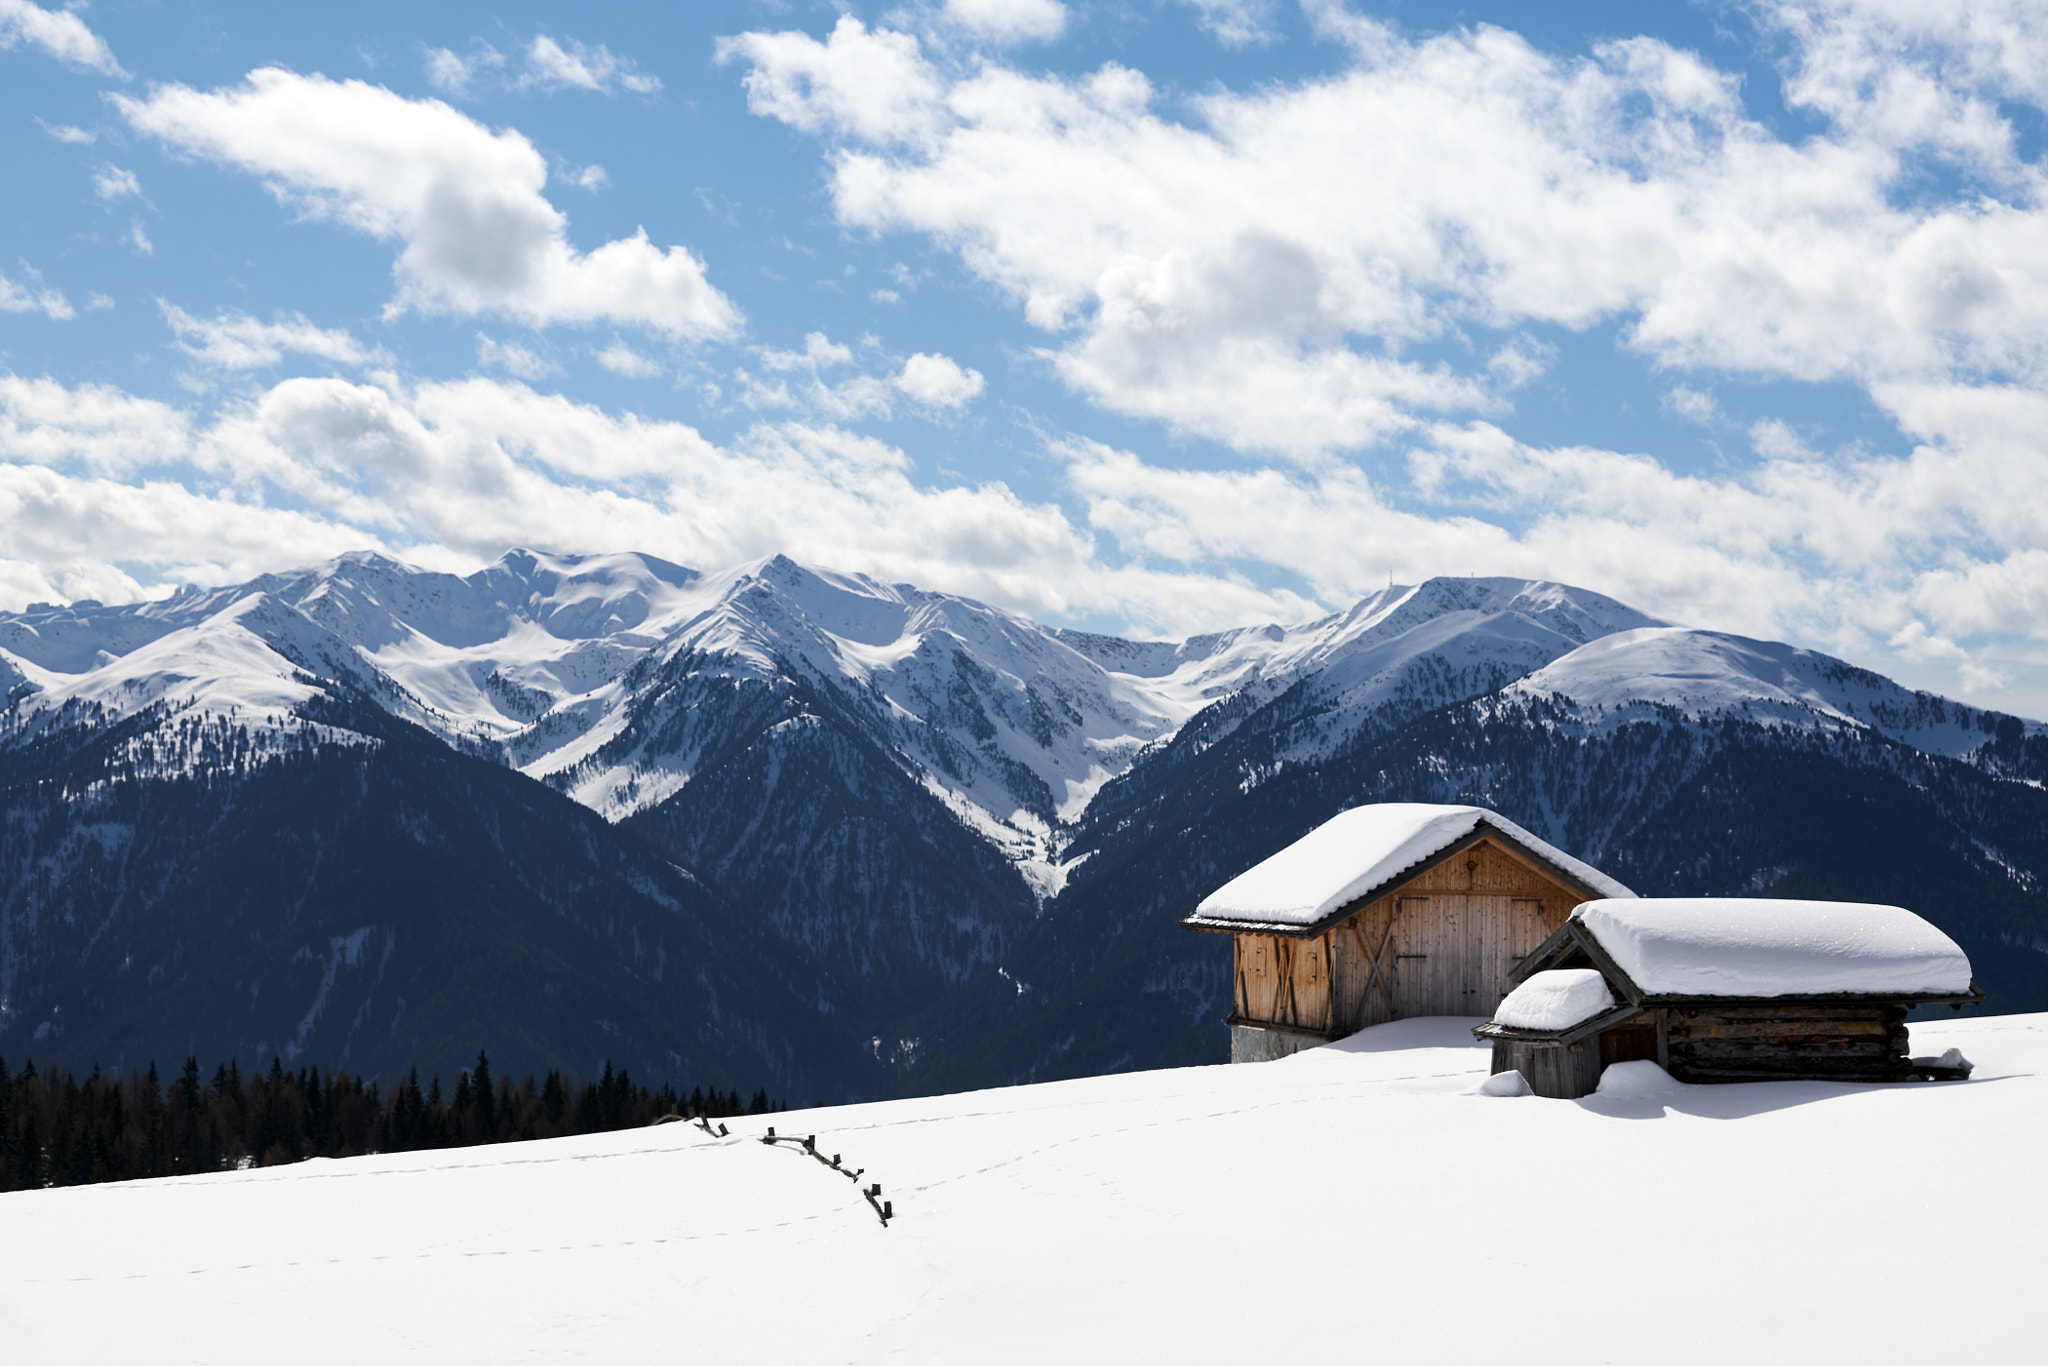 Sony 70-200mm F2.8 G sample photo. Two huts on rodenegger alm photography